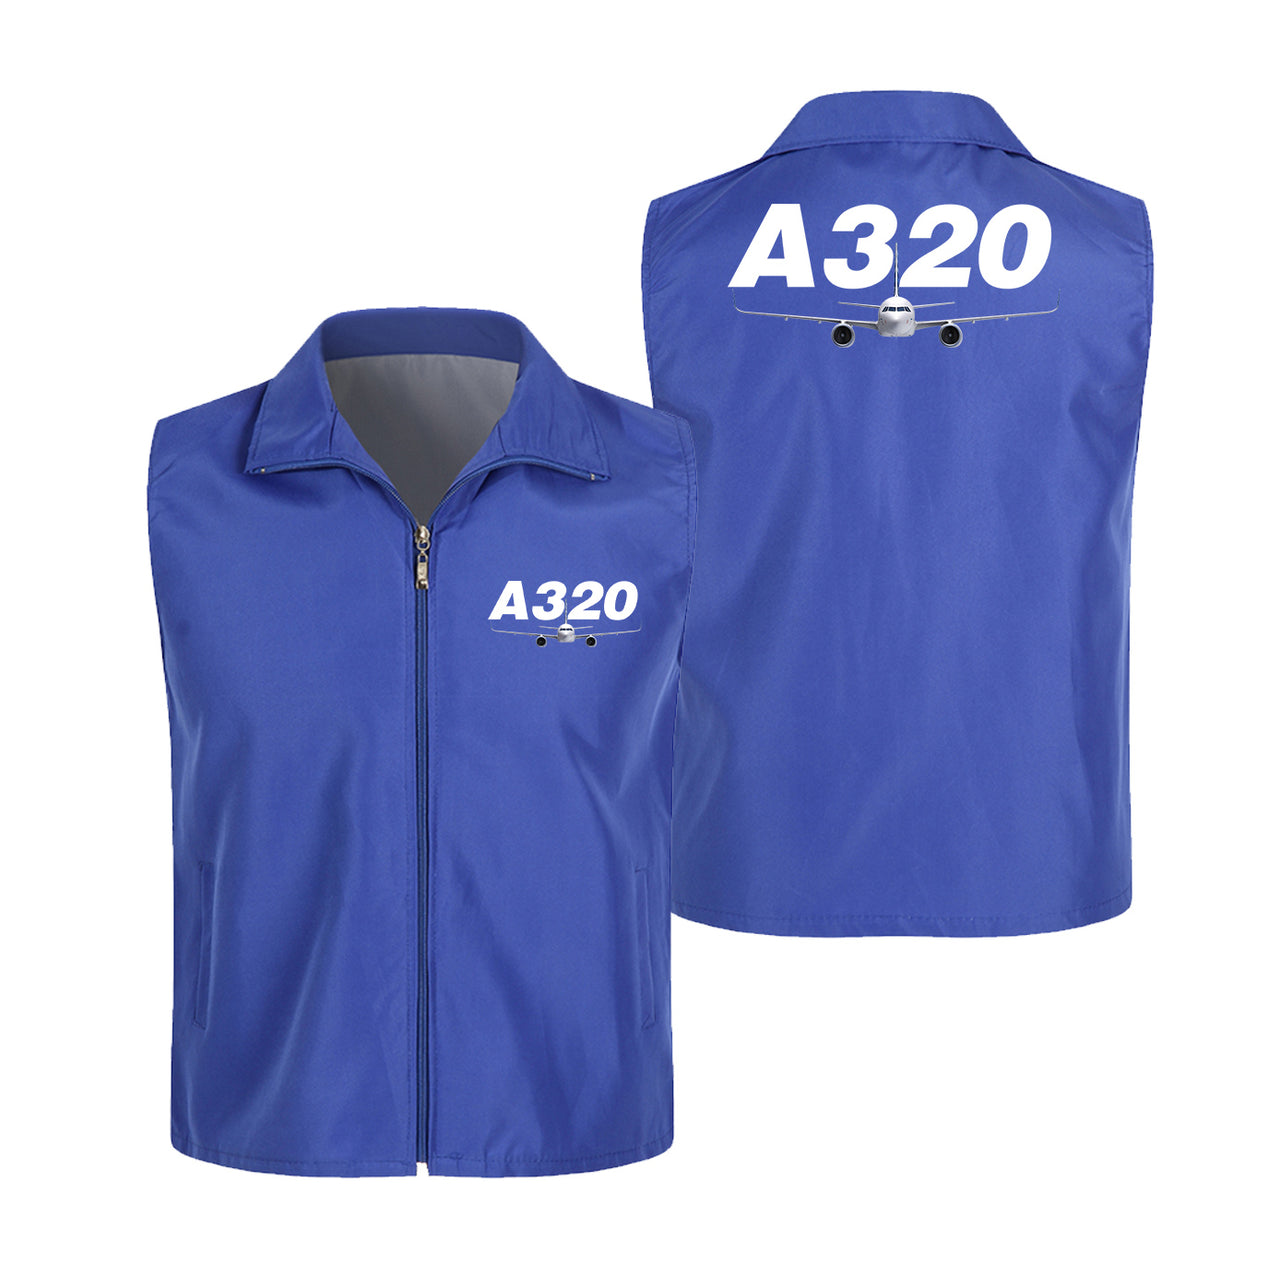 Super Airbus A320 Designed Thin Style Vests